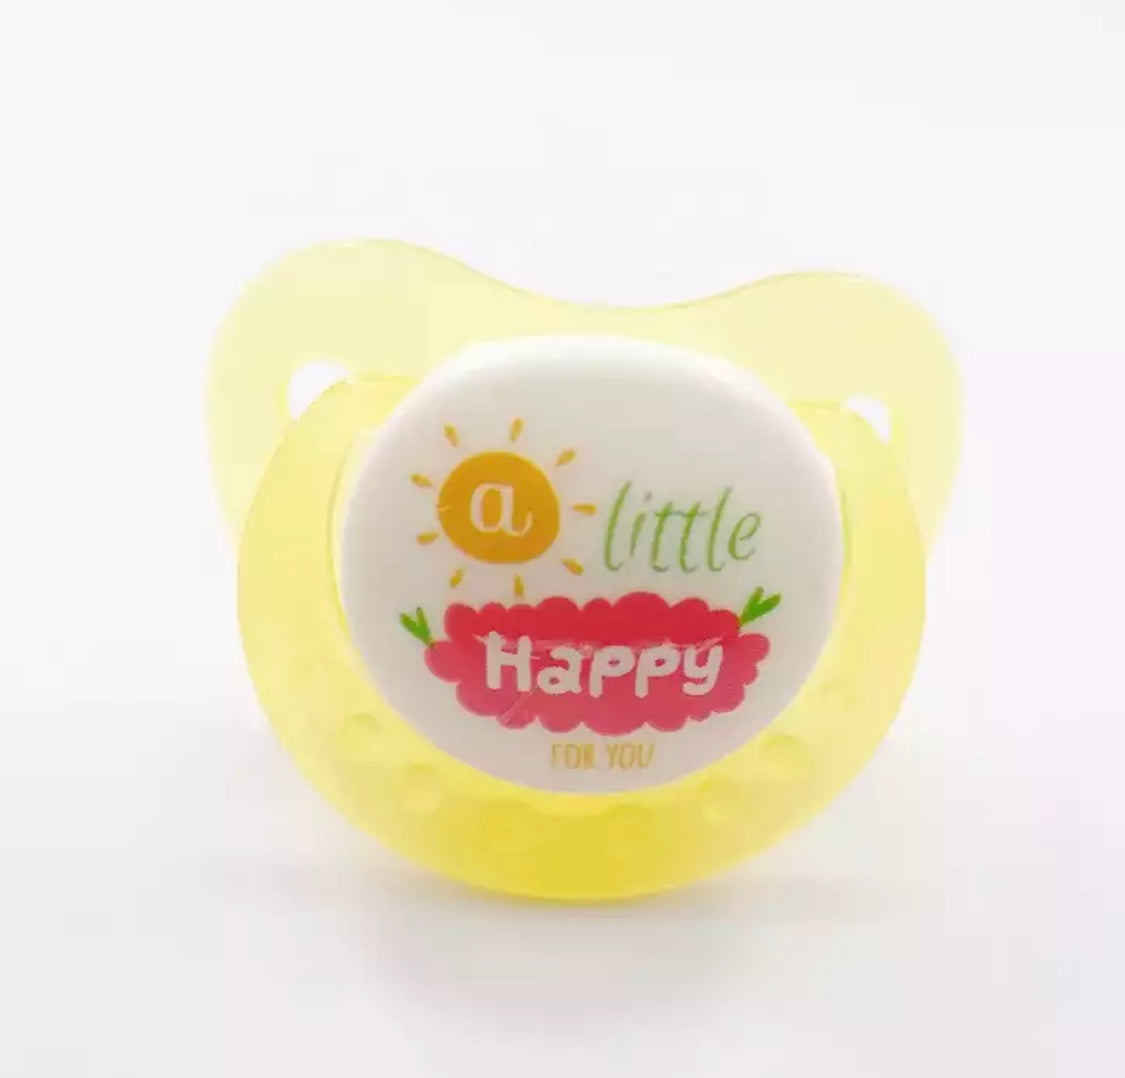 DDLGVERSE Adult Pacifier 'A little happy for you' in yellow